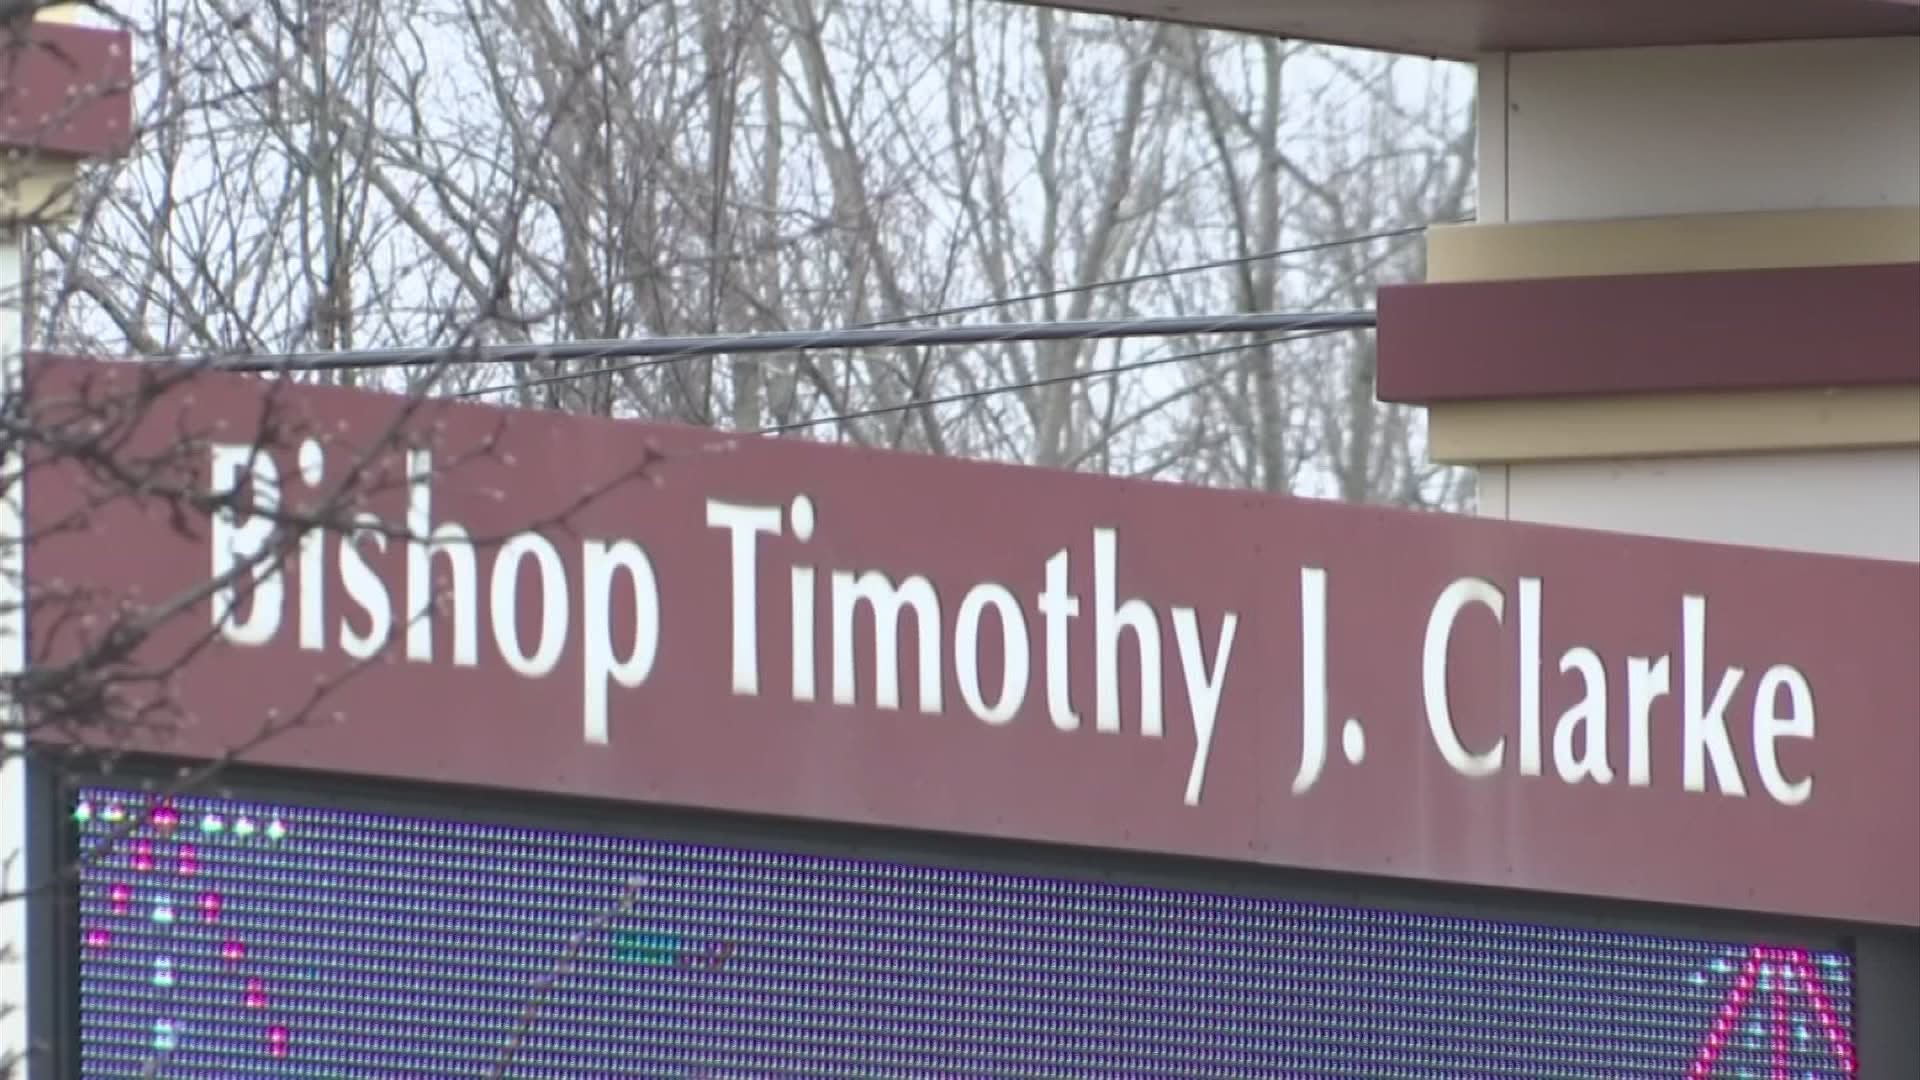 Bishop Timothy Clarke said Hill's service tomorrow will focus on healing, hope and honesty.